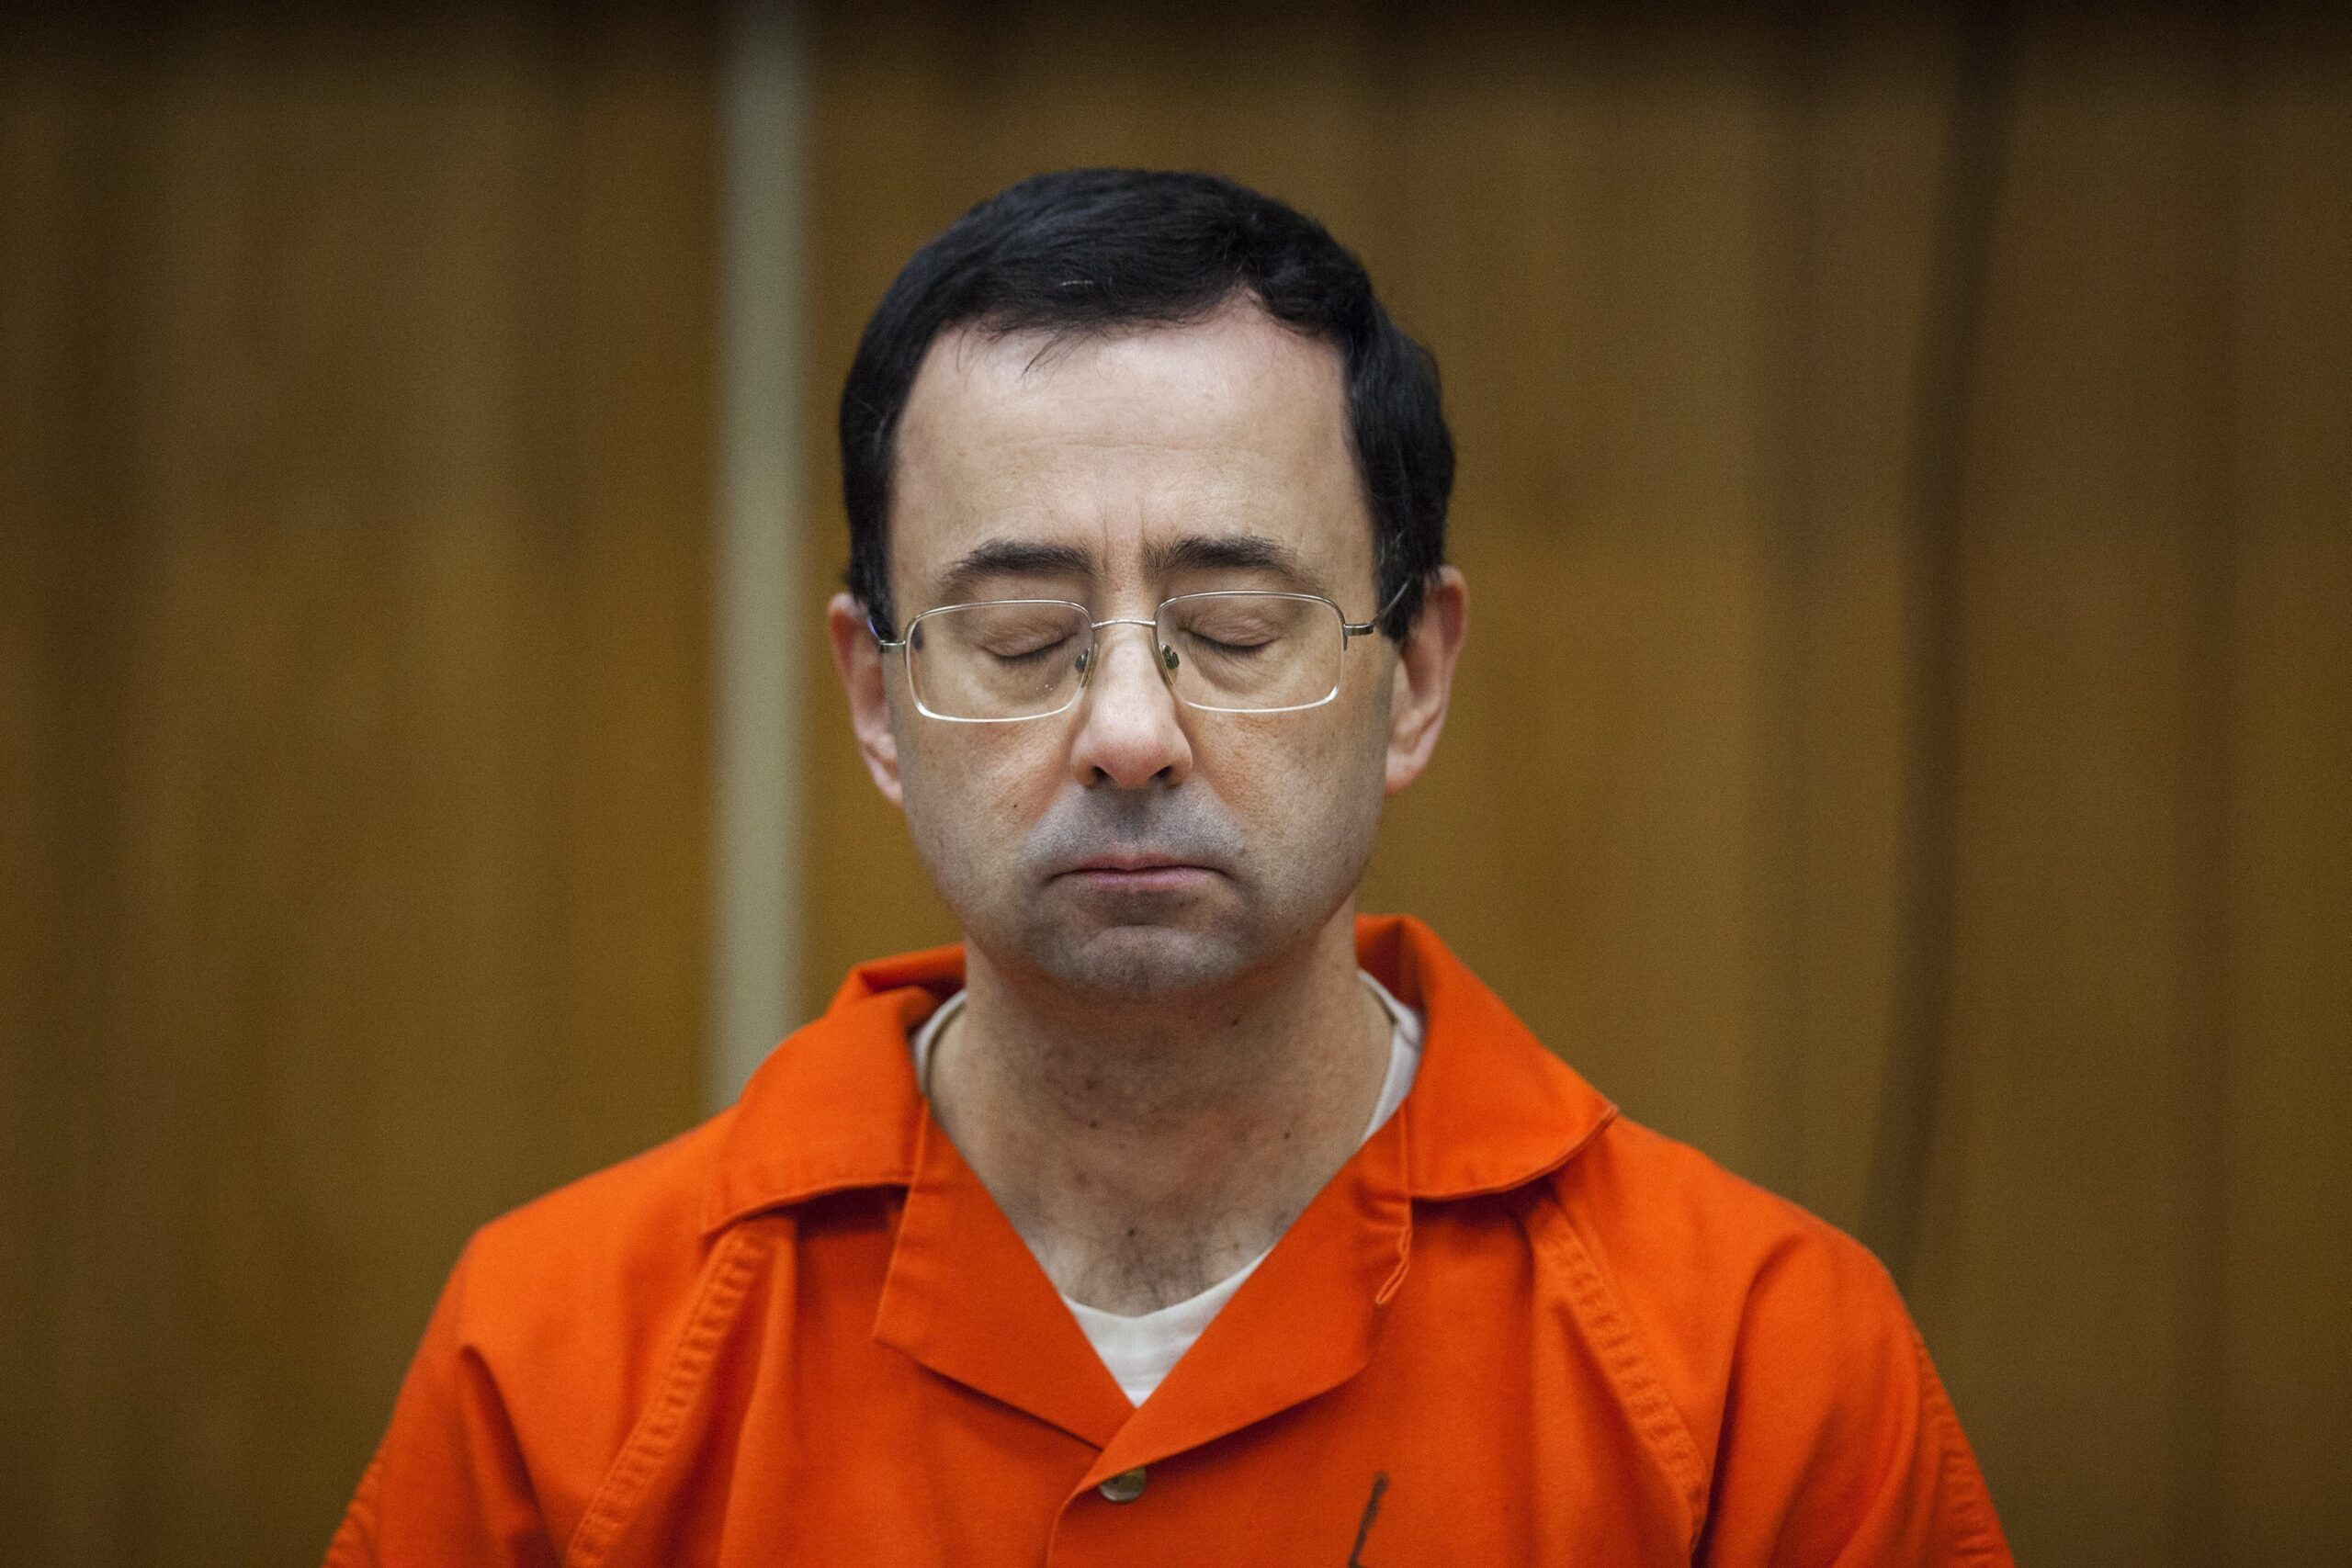 Inmate Who Almost Killed Larry Nassar Reportedly Gives Motive (mediaite.com)